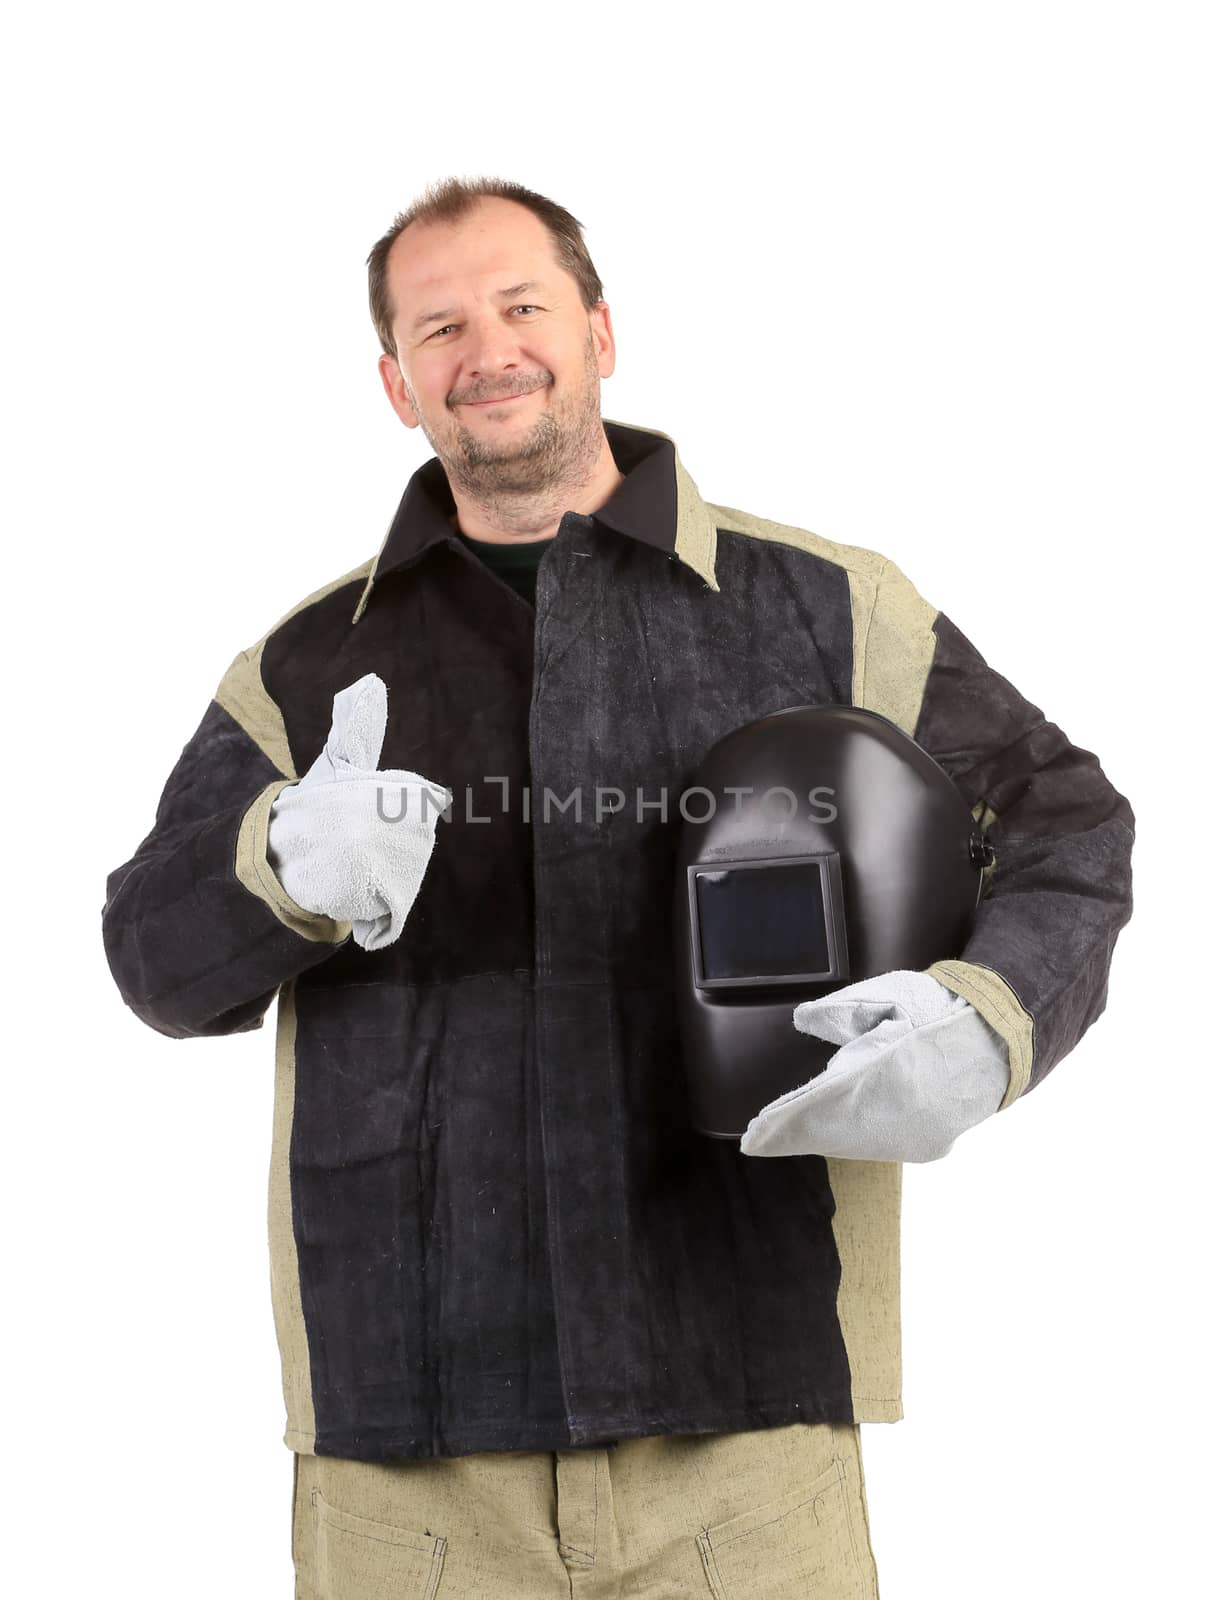 Welder with mask in hands. Isolated on a white background.